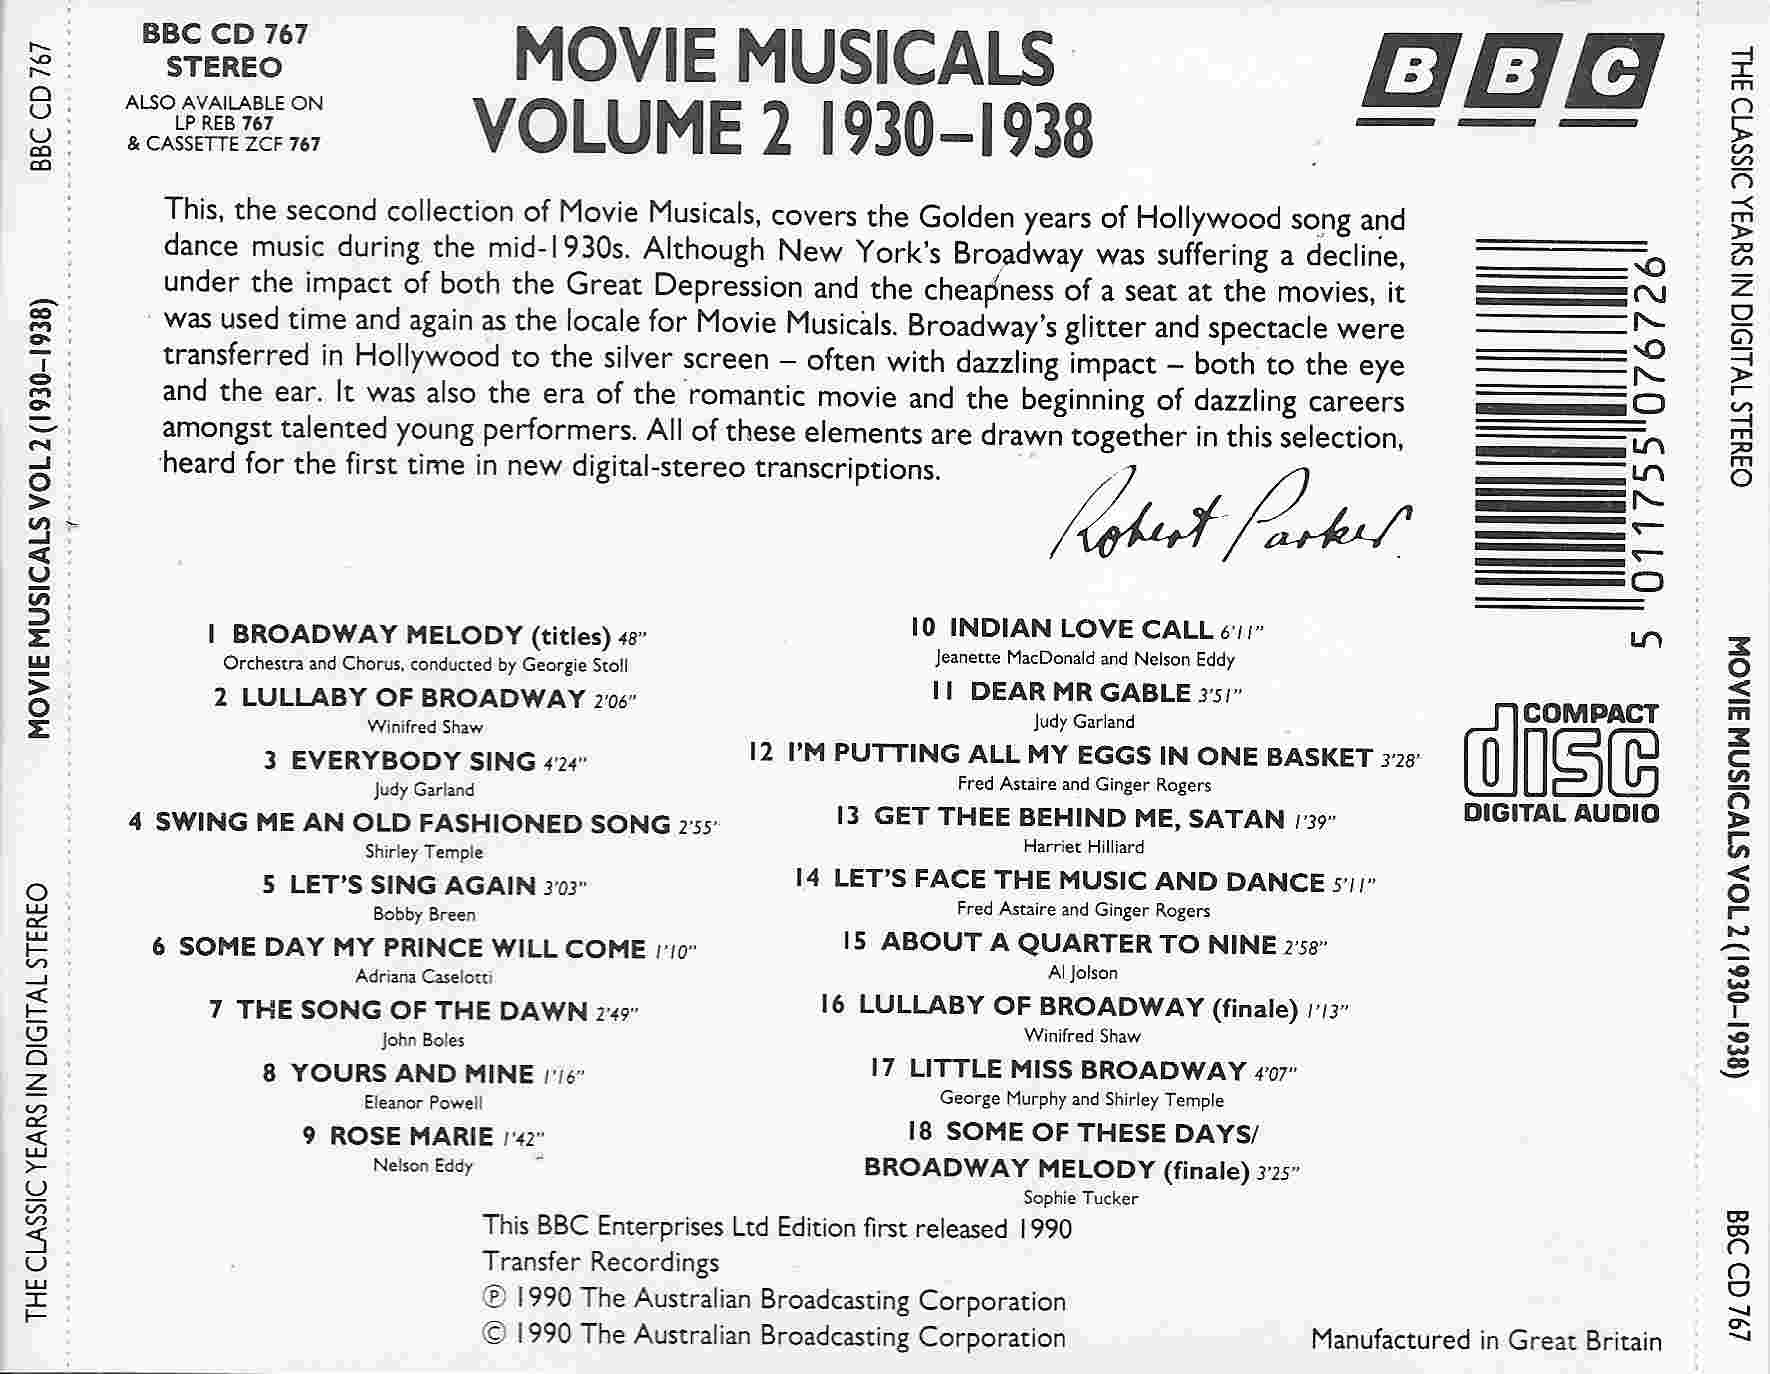 Picture of BBCCD767 Classic years - Movie musicals 1930 - 1938 by artist Various from the BBC records and Tapes library